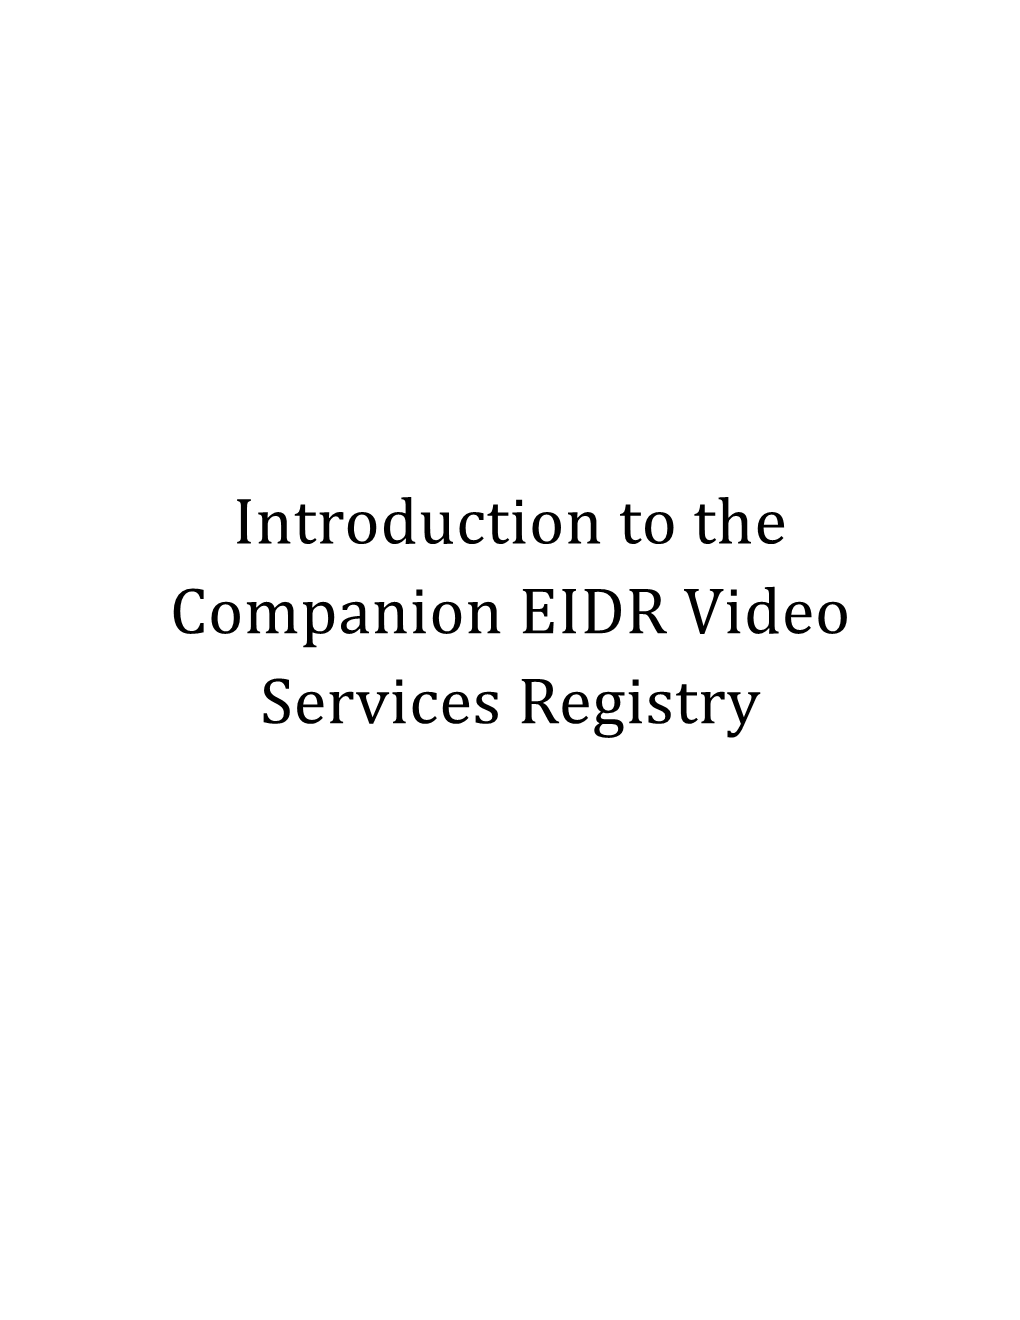 Introduction to the Companion EIDR Video Services Registry